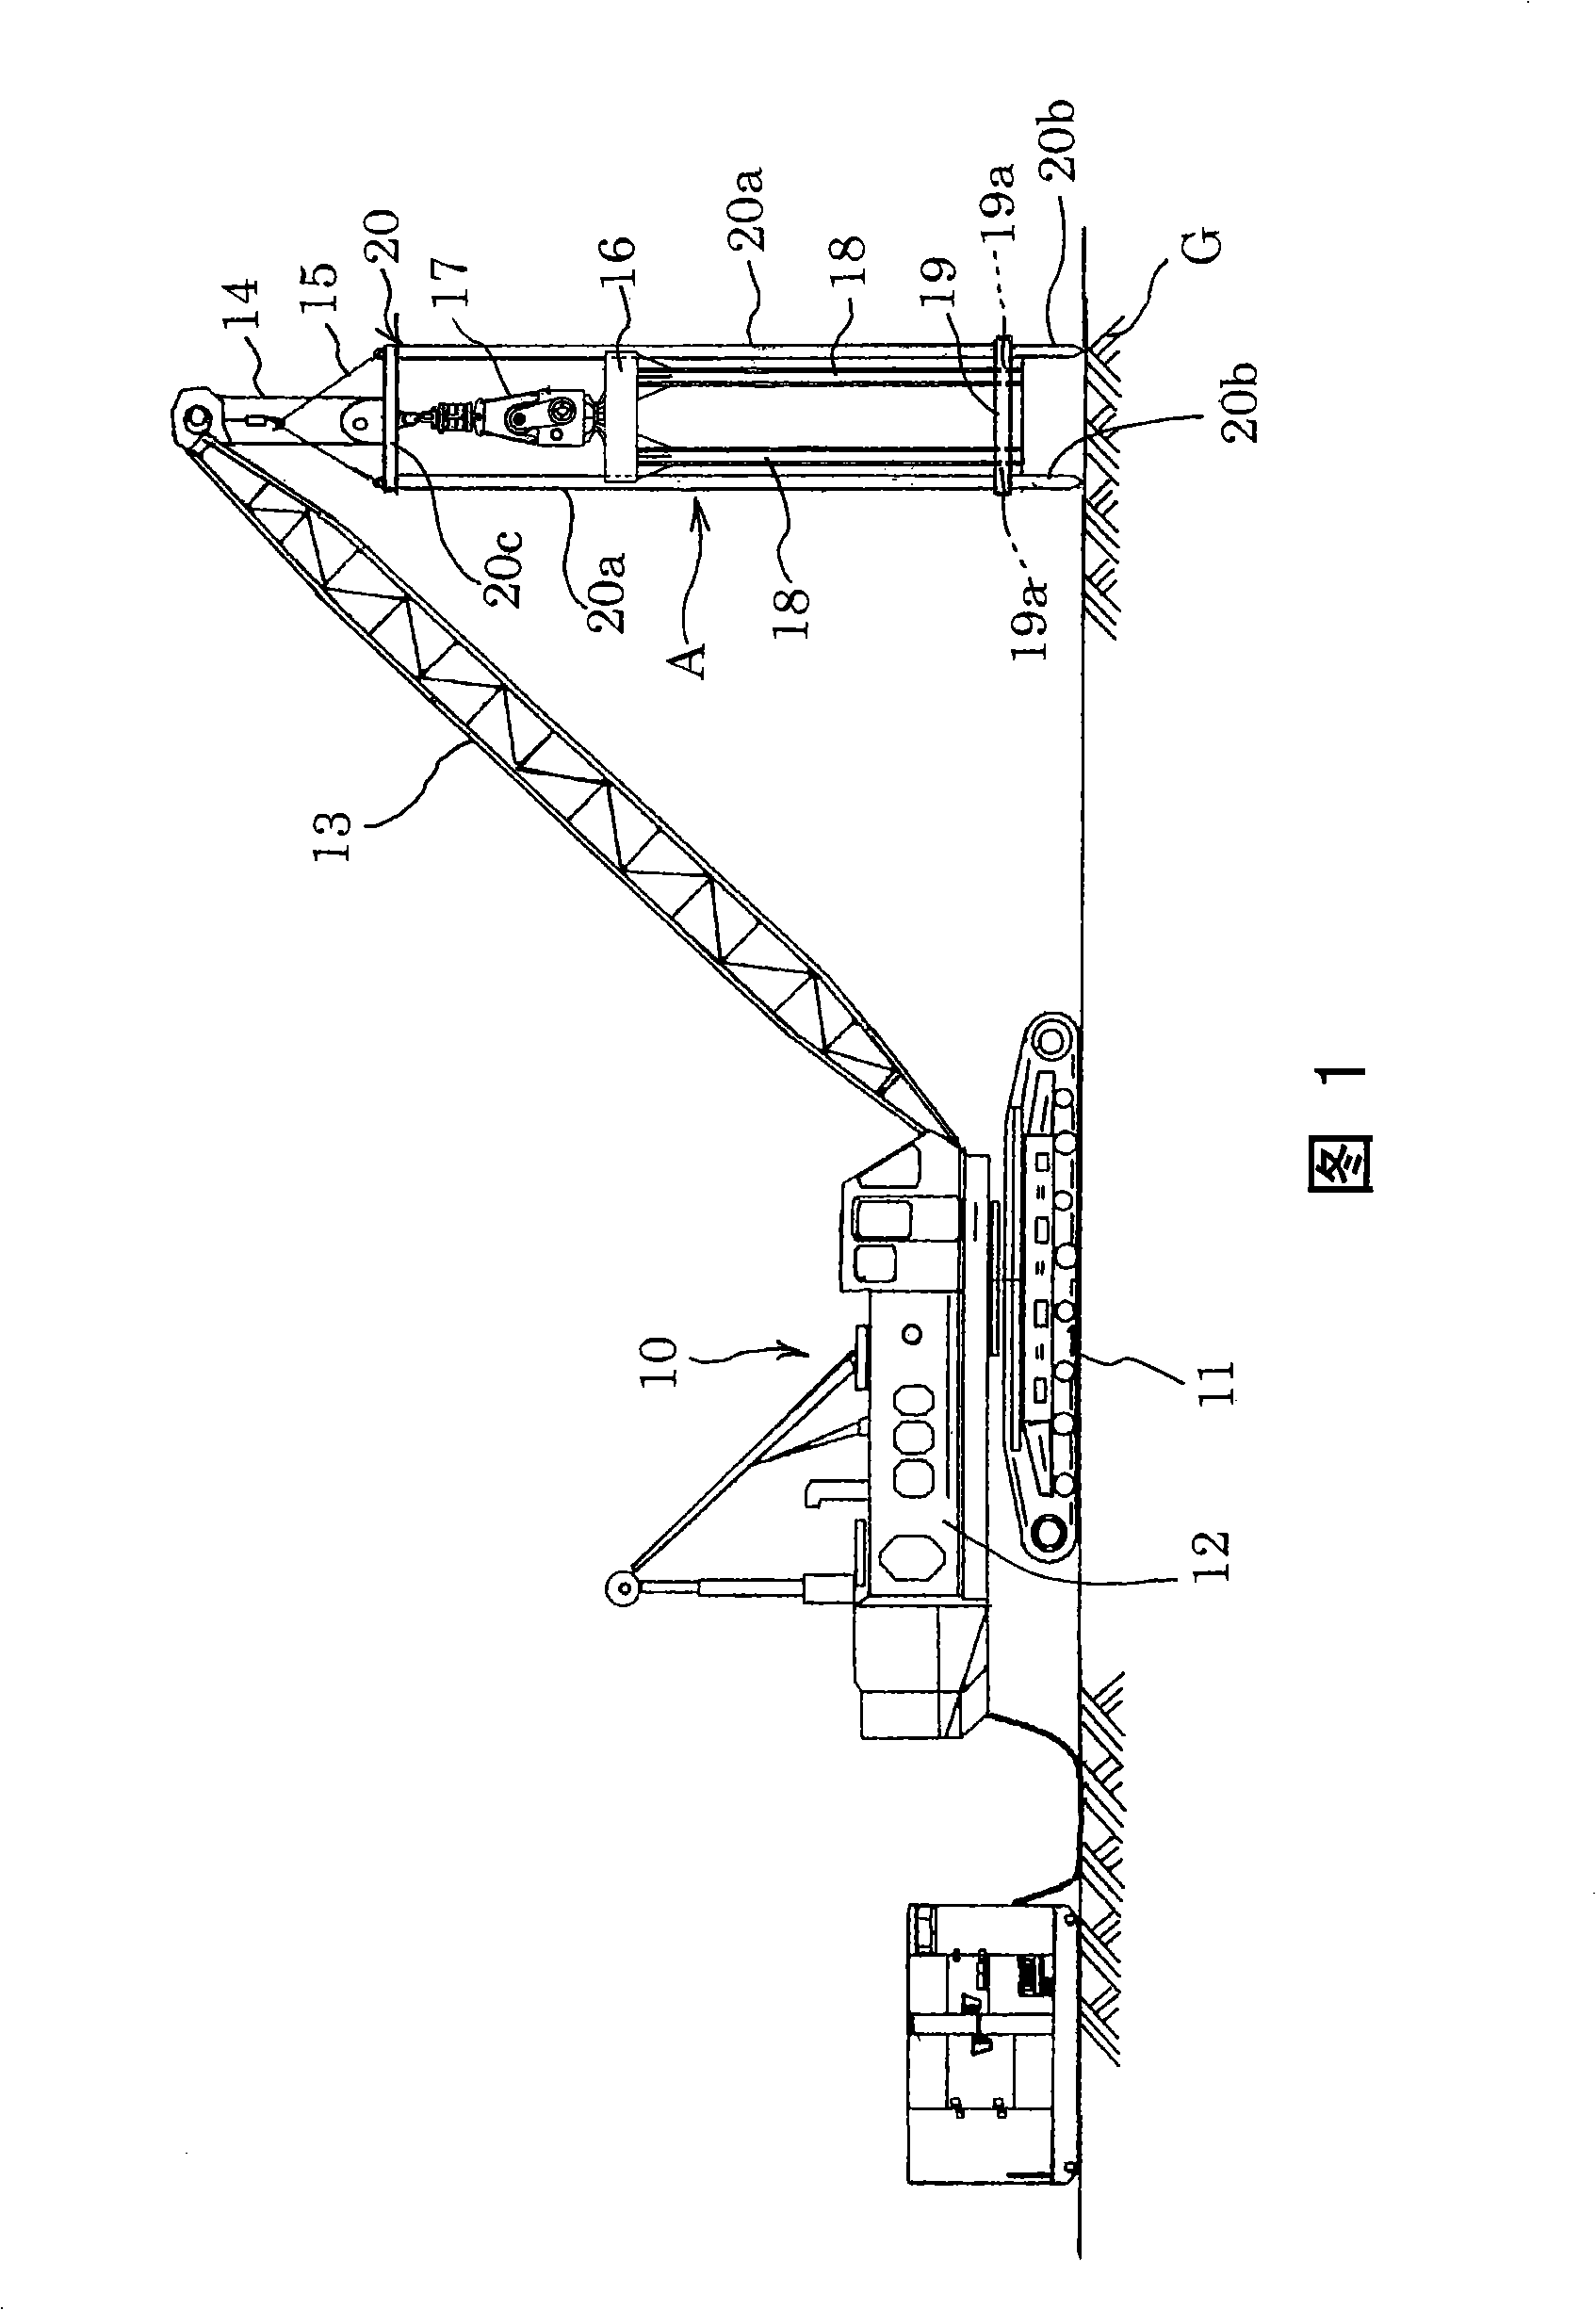 Device for compacting sand soil foundation by librating